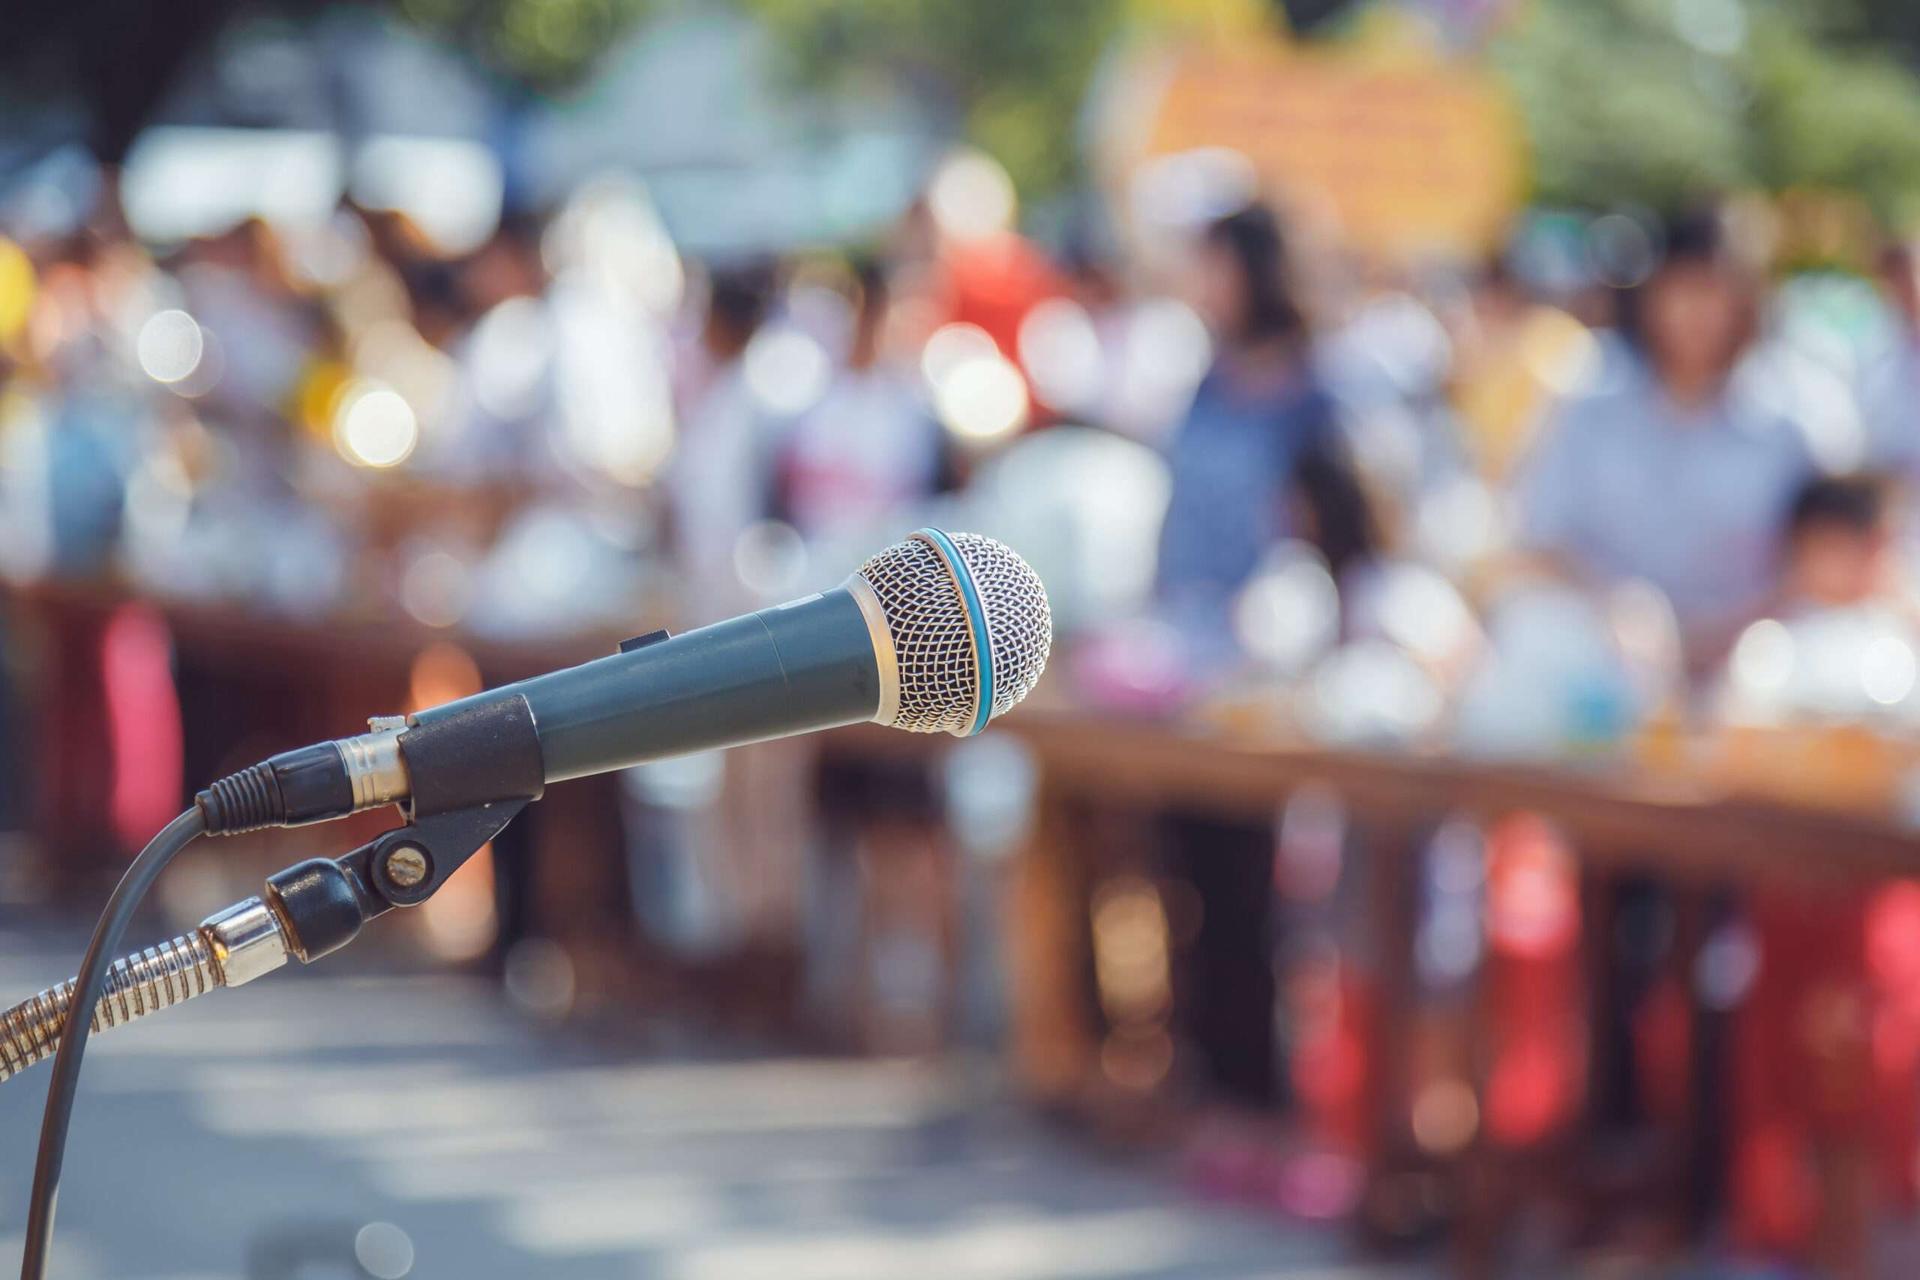 image of a microphone in front of a crowd